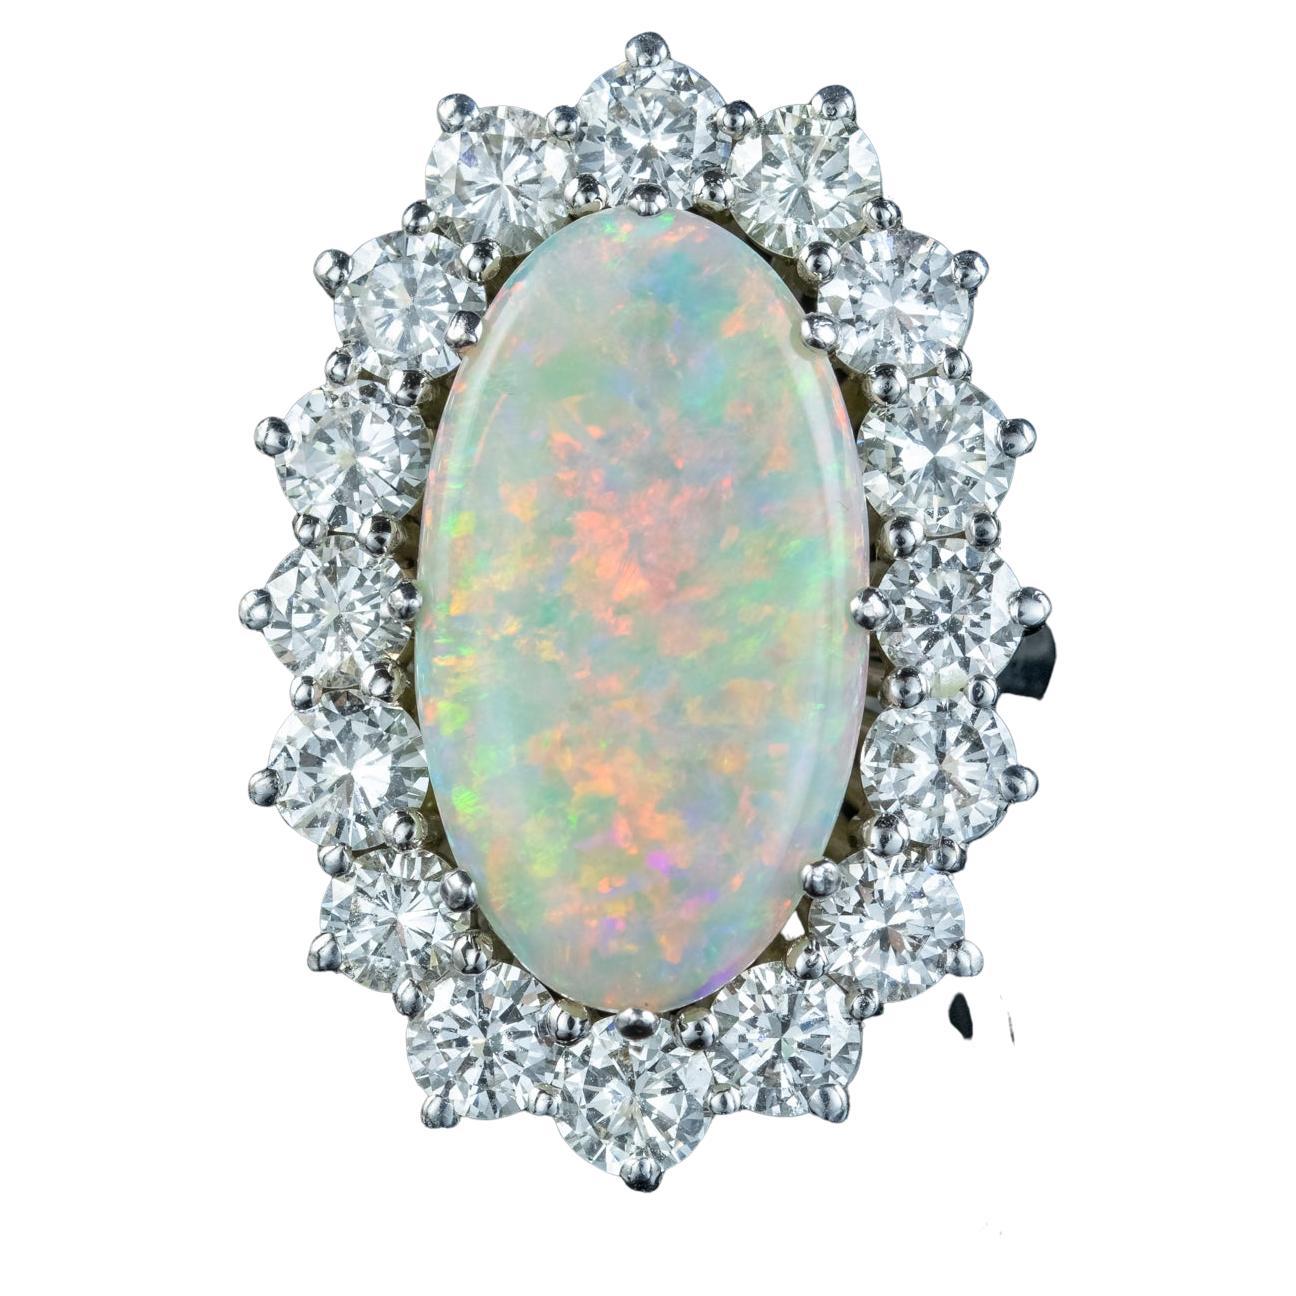 Vintage Opal Diamond Cocktail Ring 12 Ct Opal 4 Ct Diamond For Sale